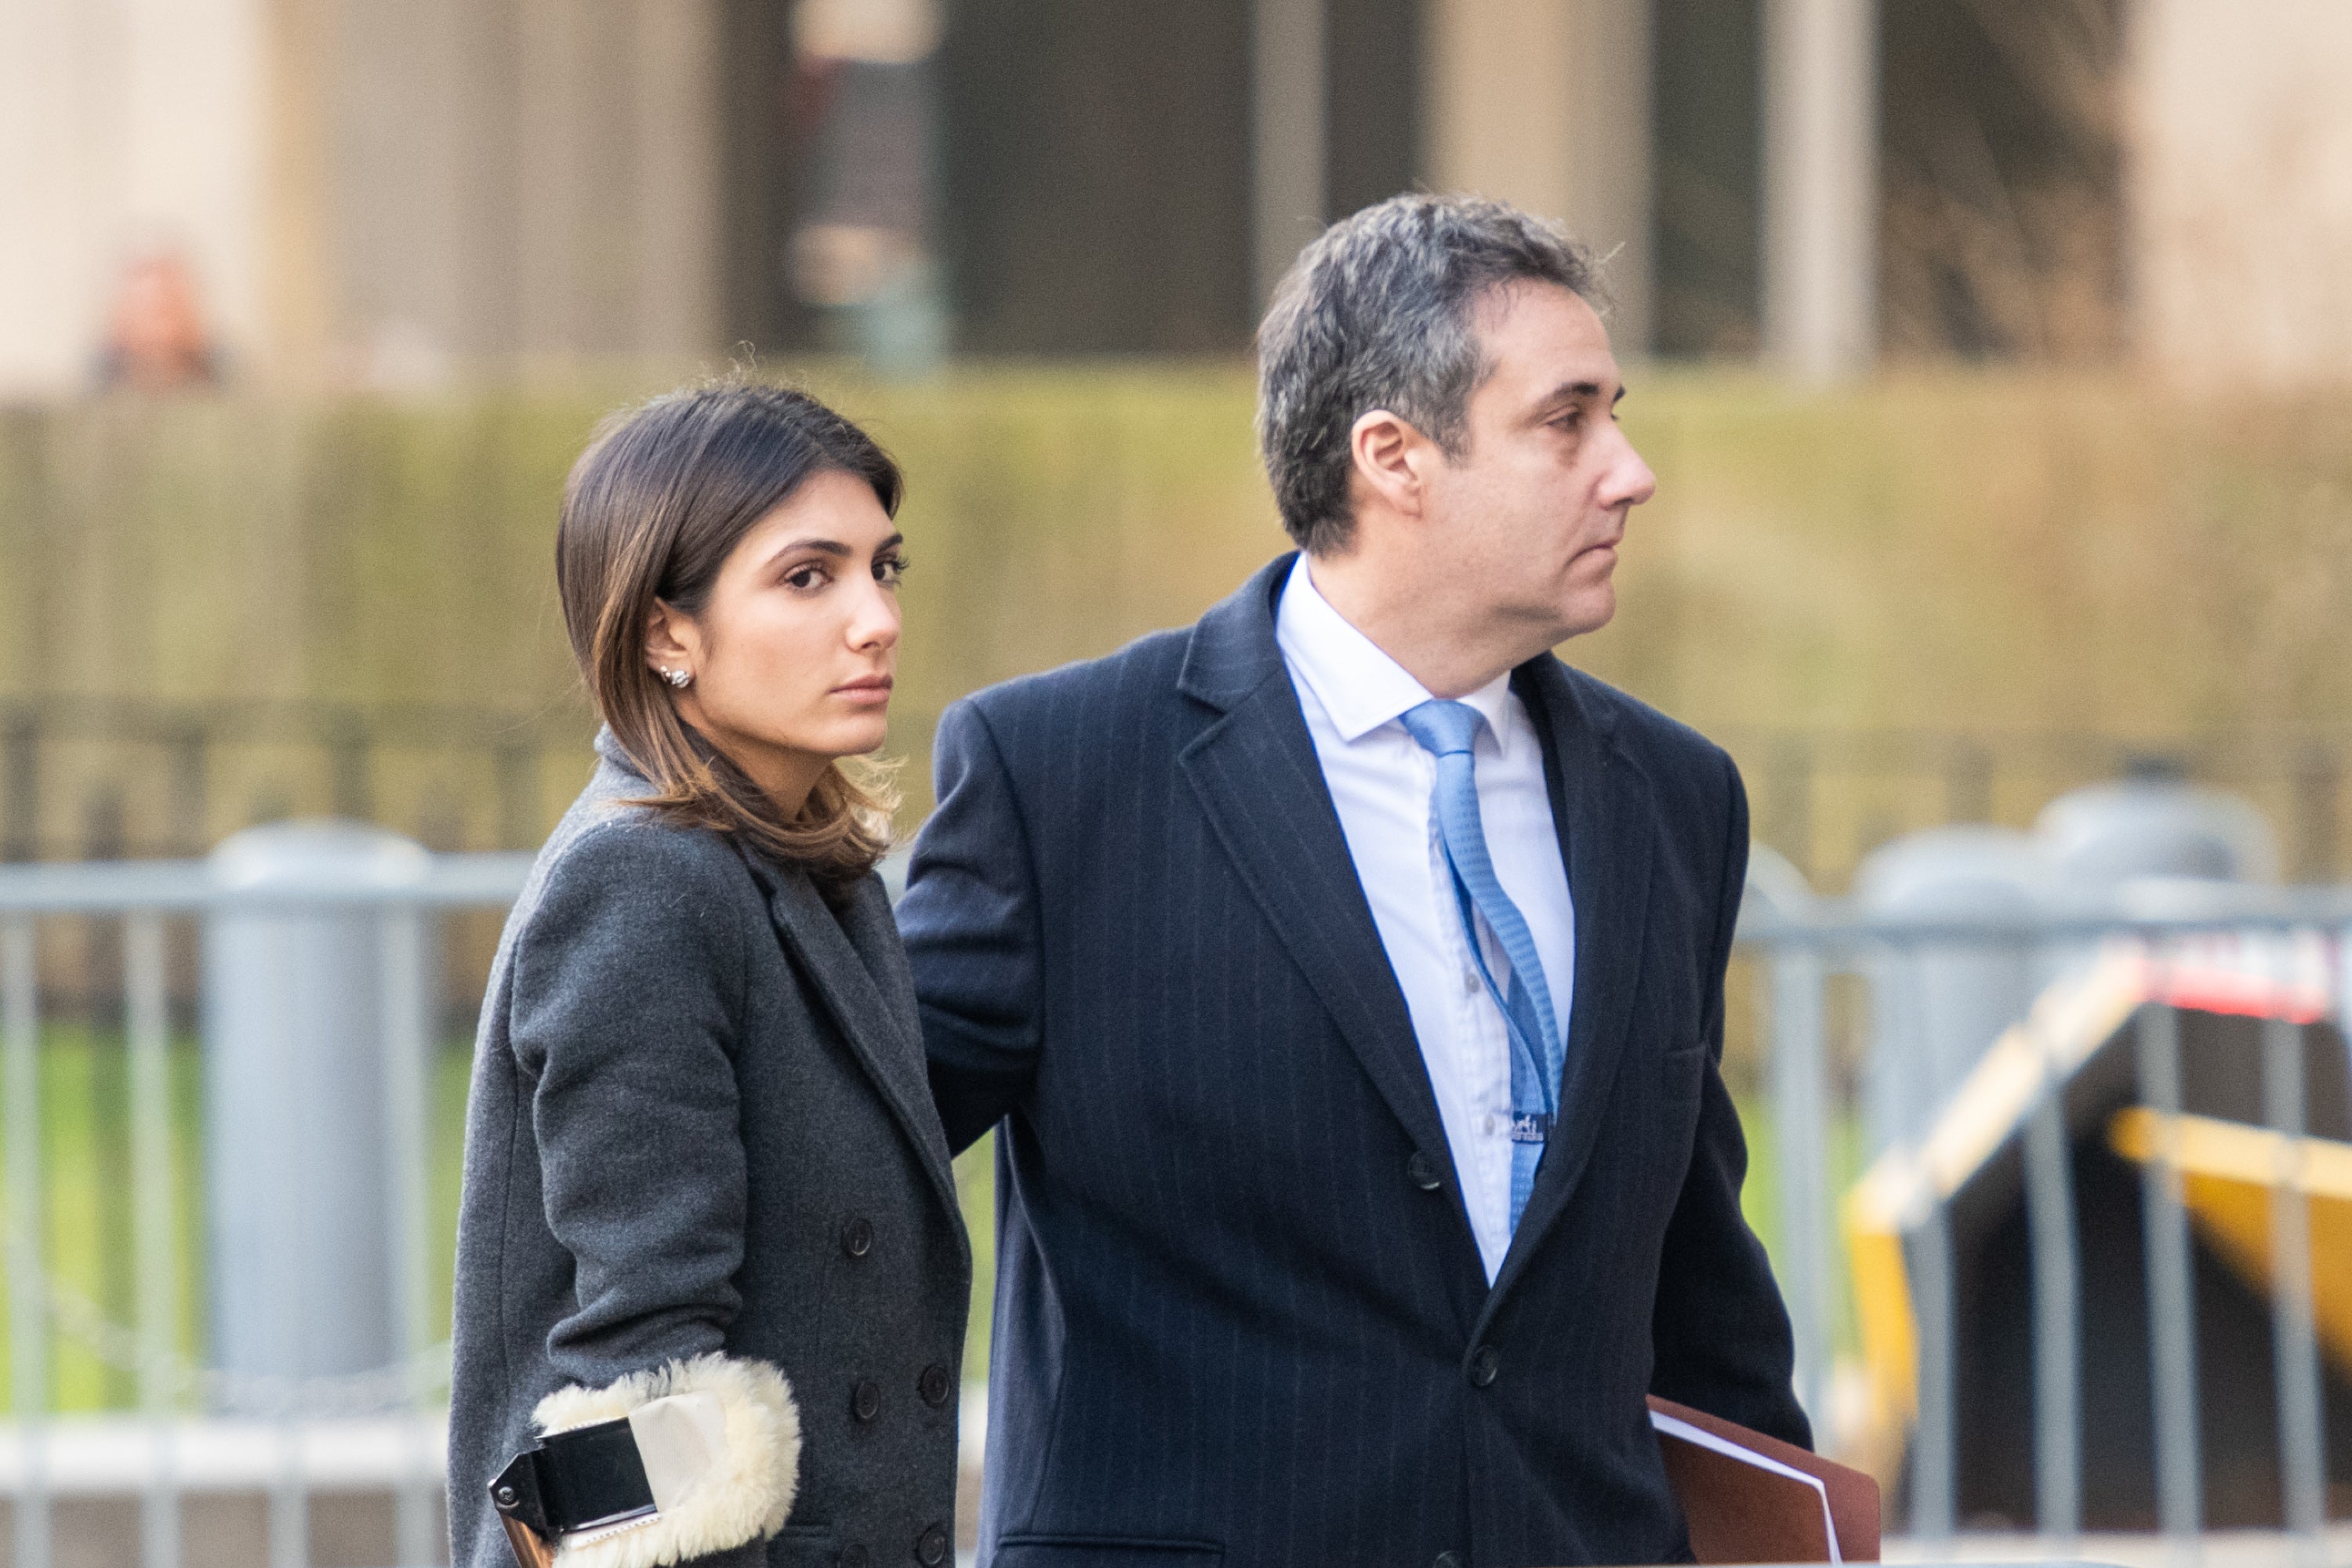 Samantha Cohen and her father Michael Cohen are outdoors near sidewalk barricades.